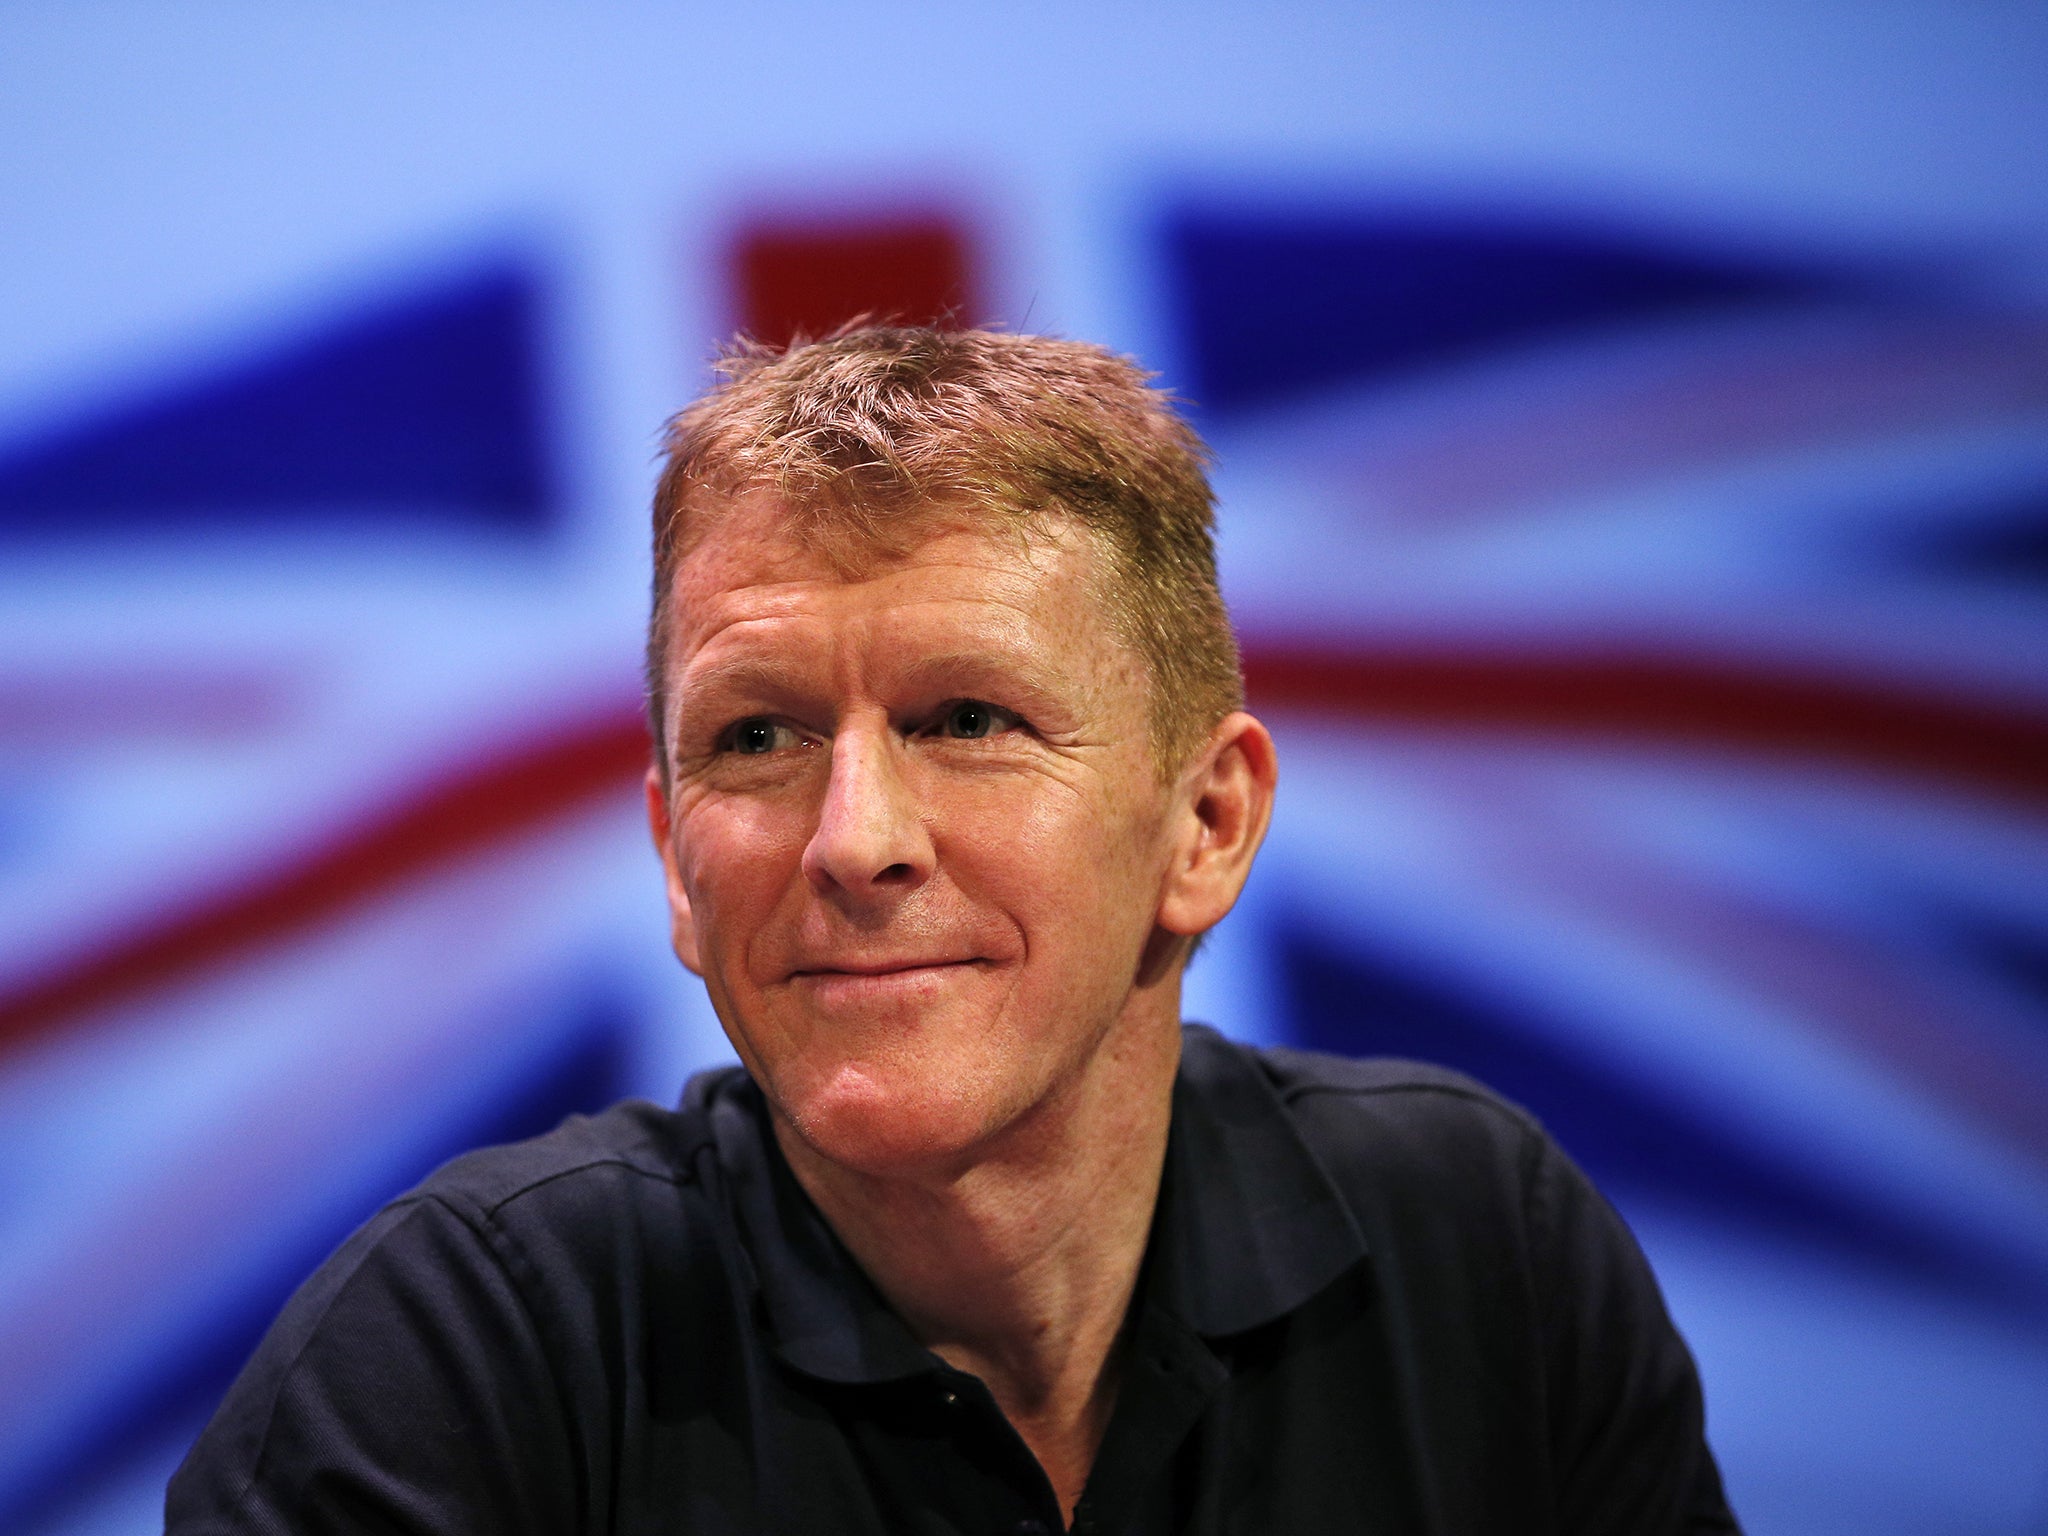 Major Tim Peake is set to become Britain’s first professional astronaut